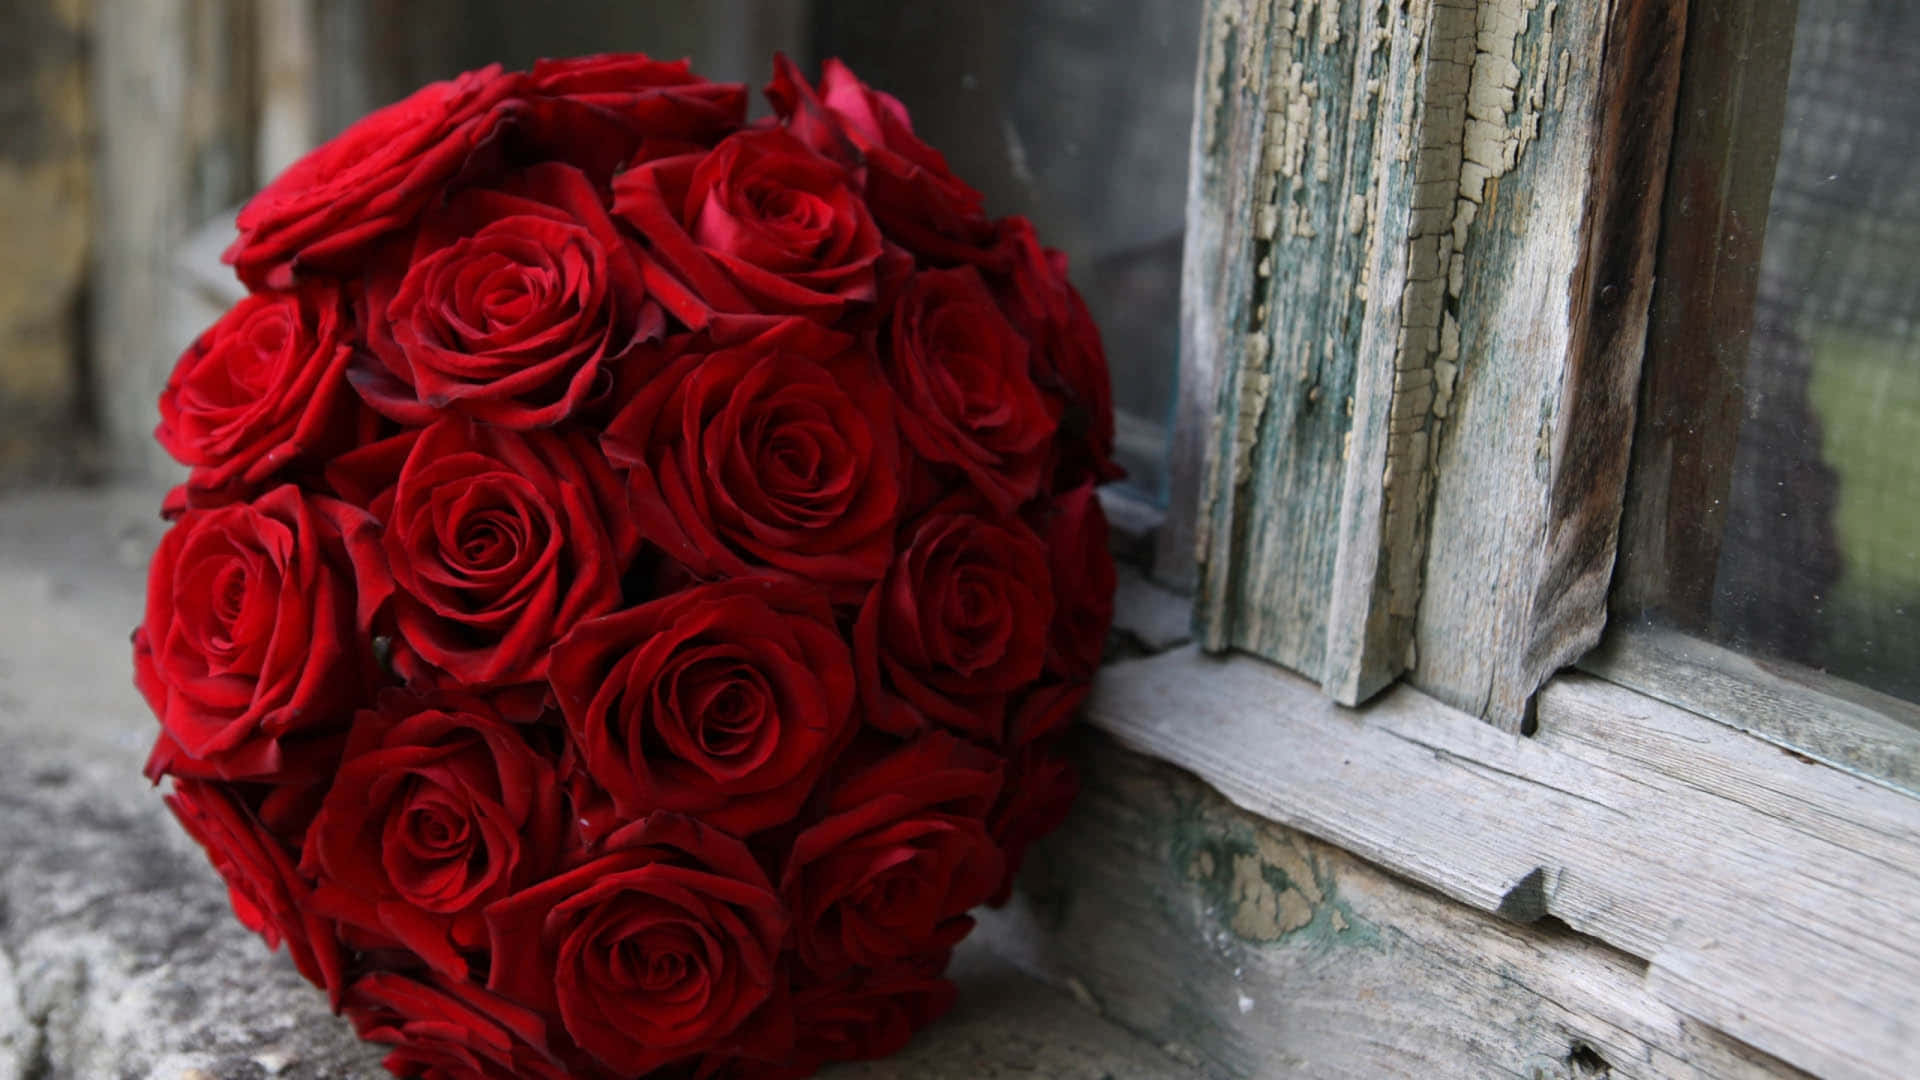 1440p Red Roses Bouquet Background